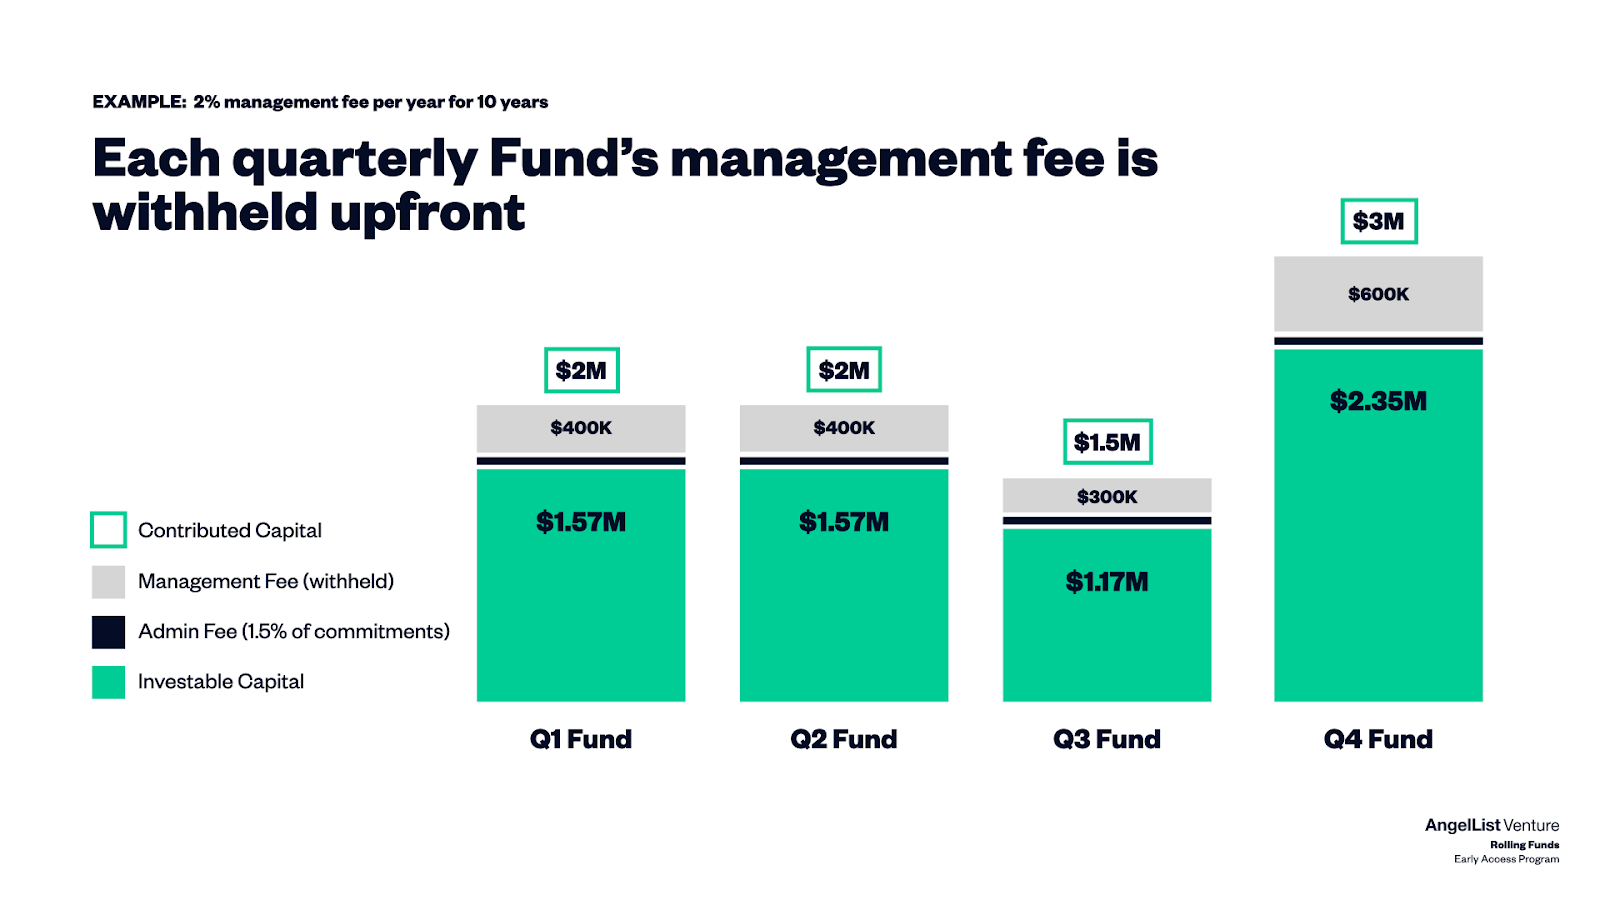 rolling fund fee structure